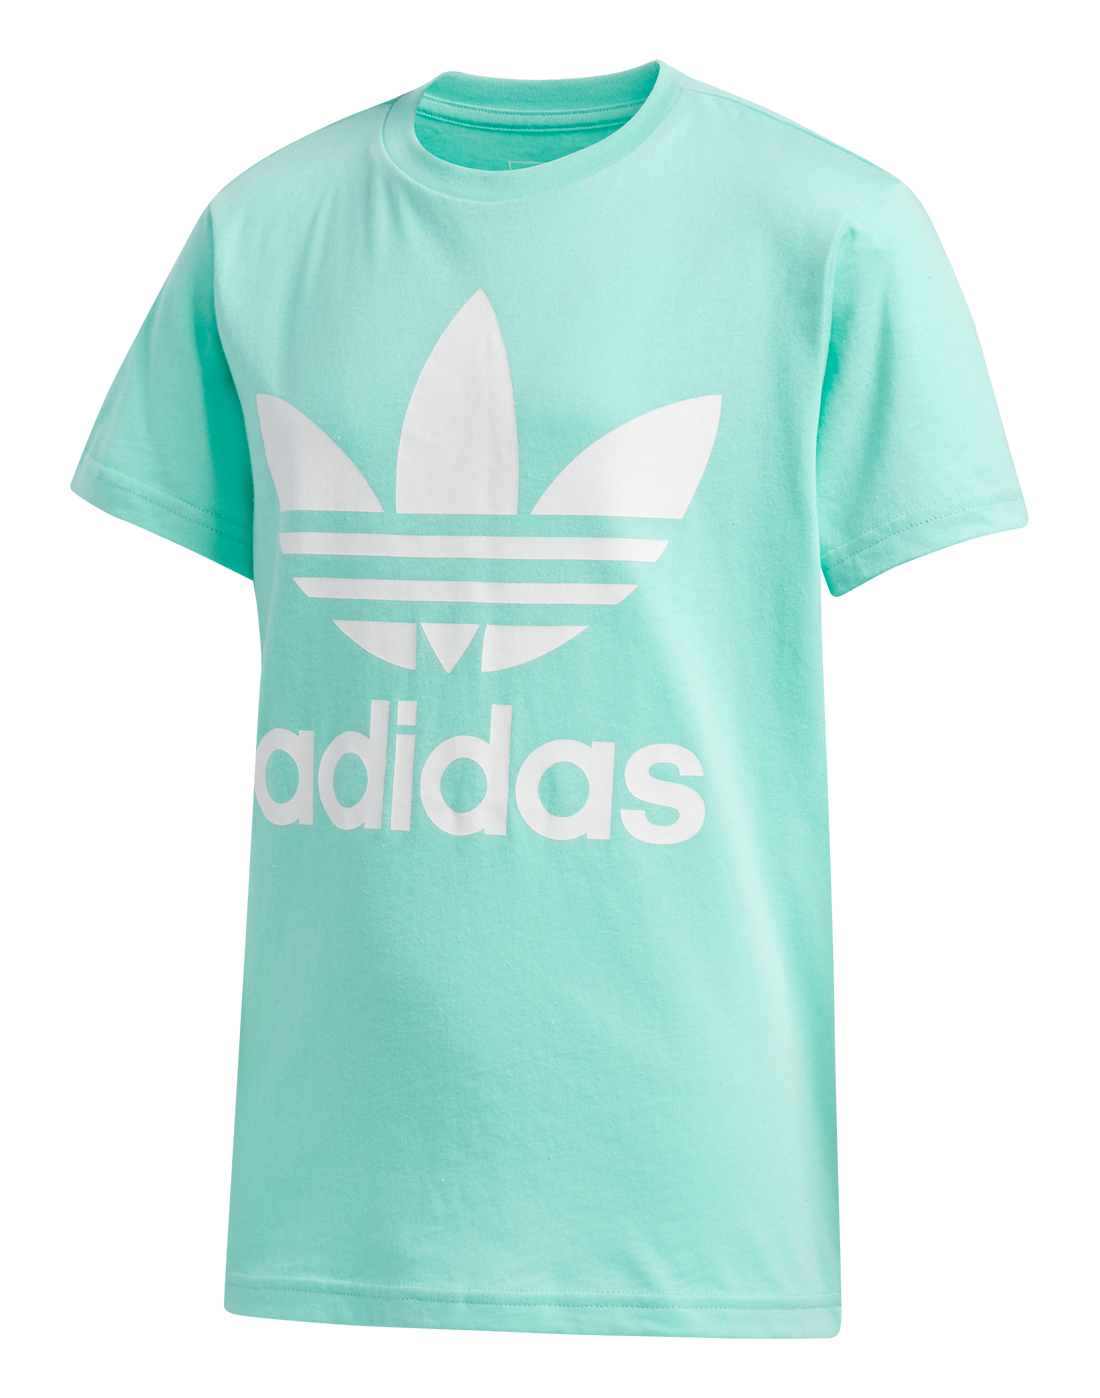 mint green adidas outfit